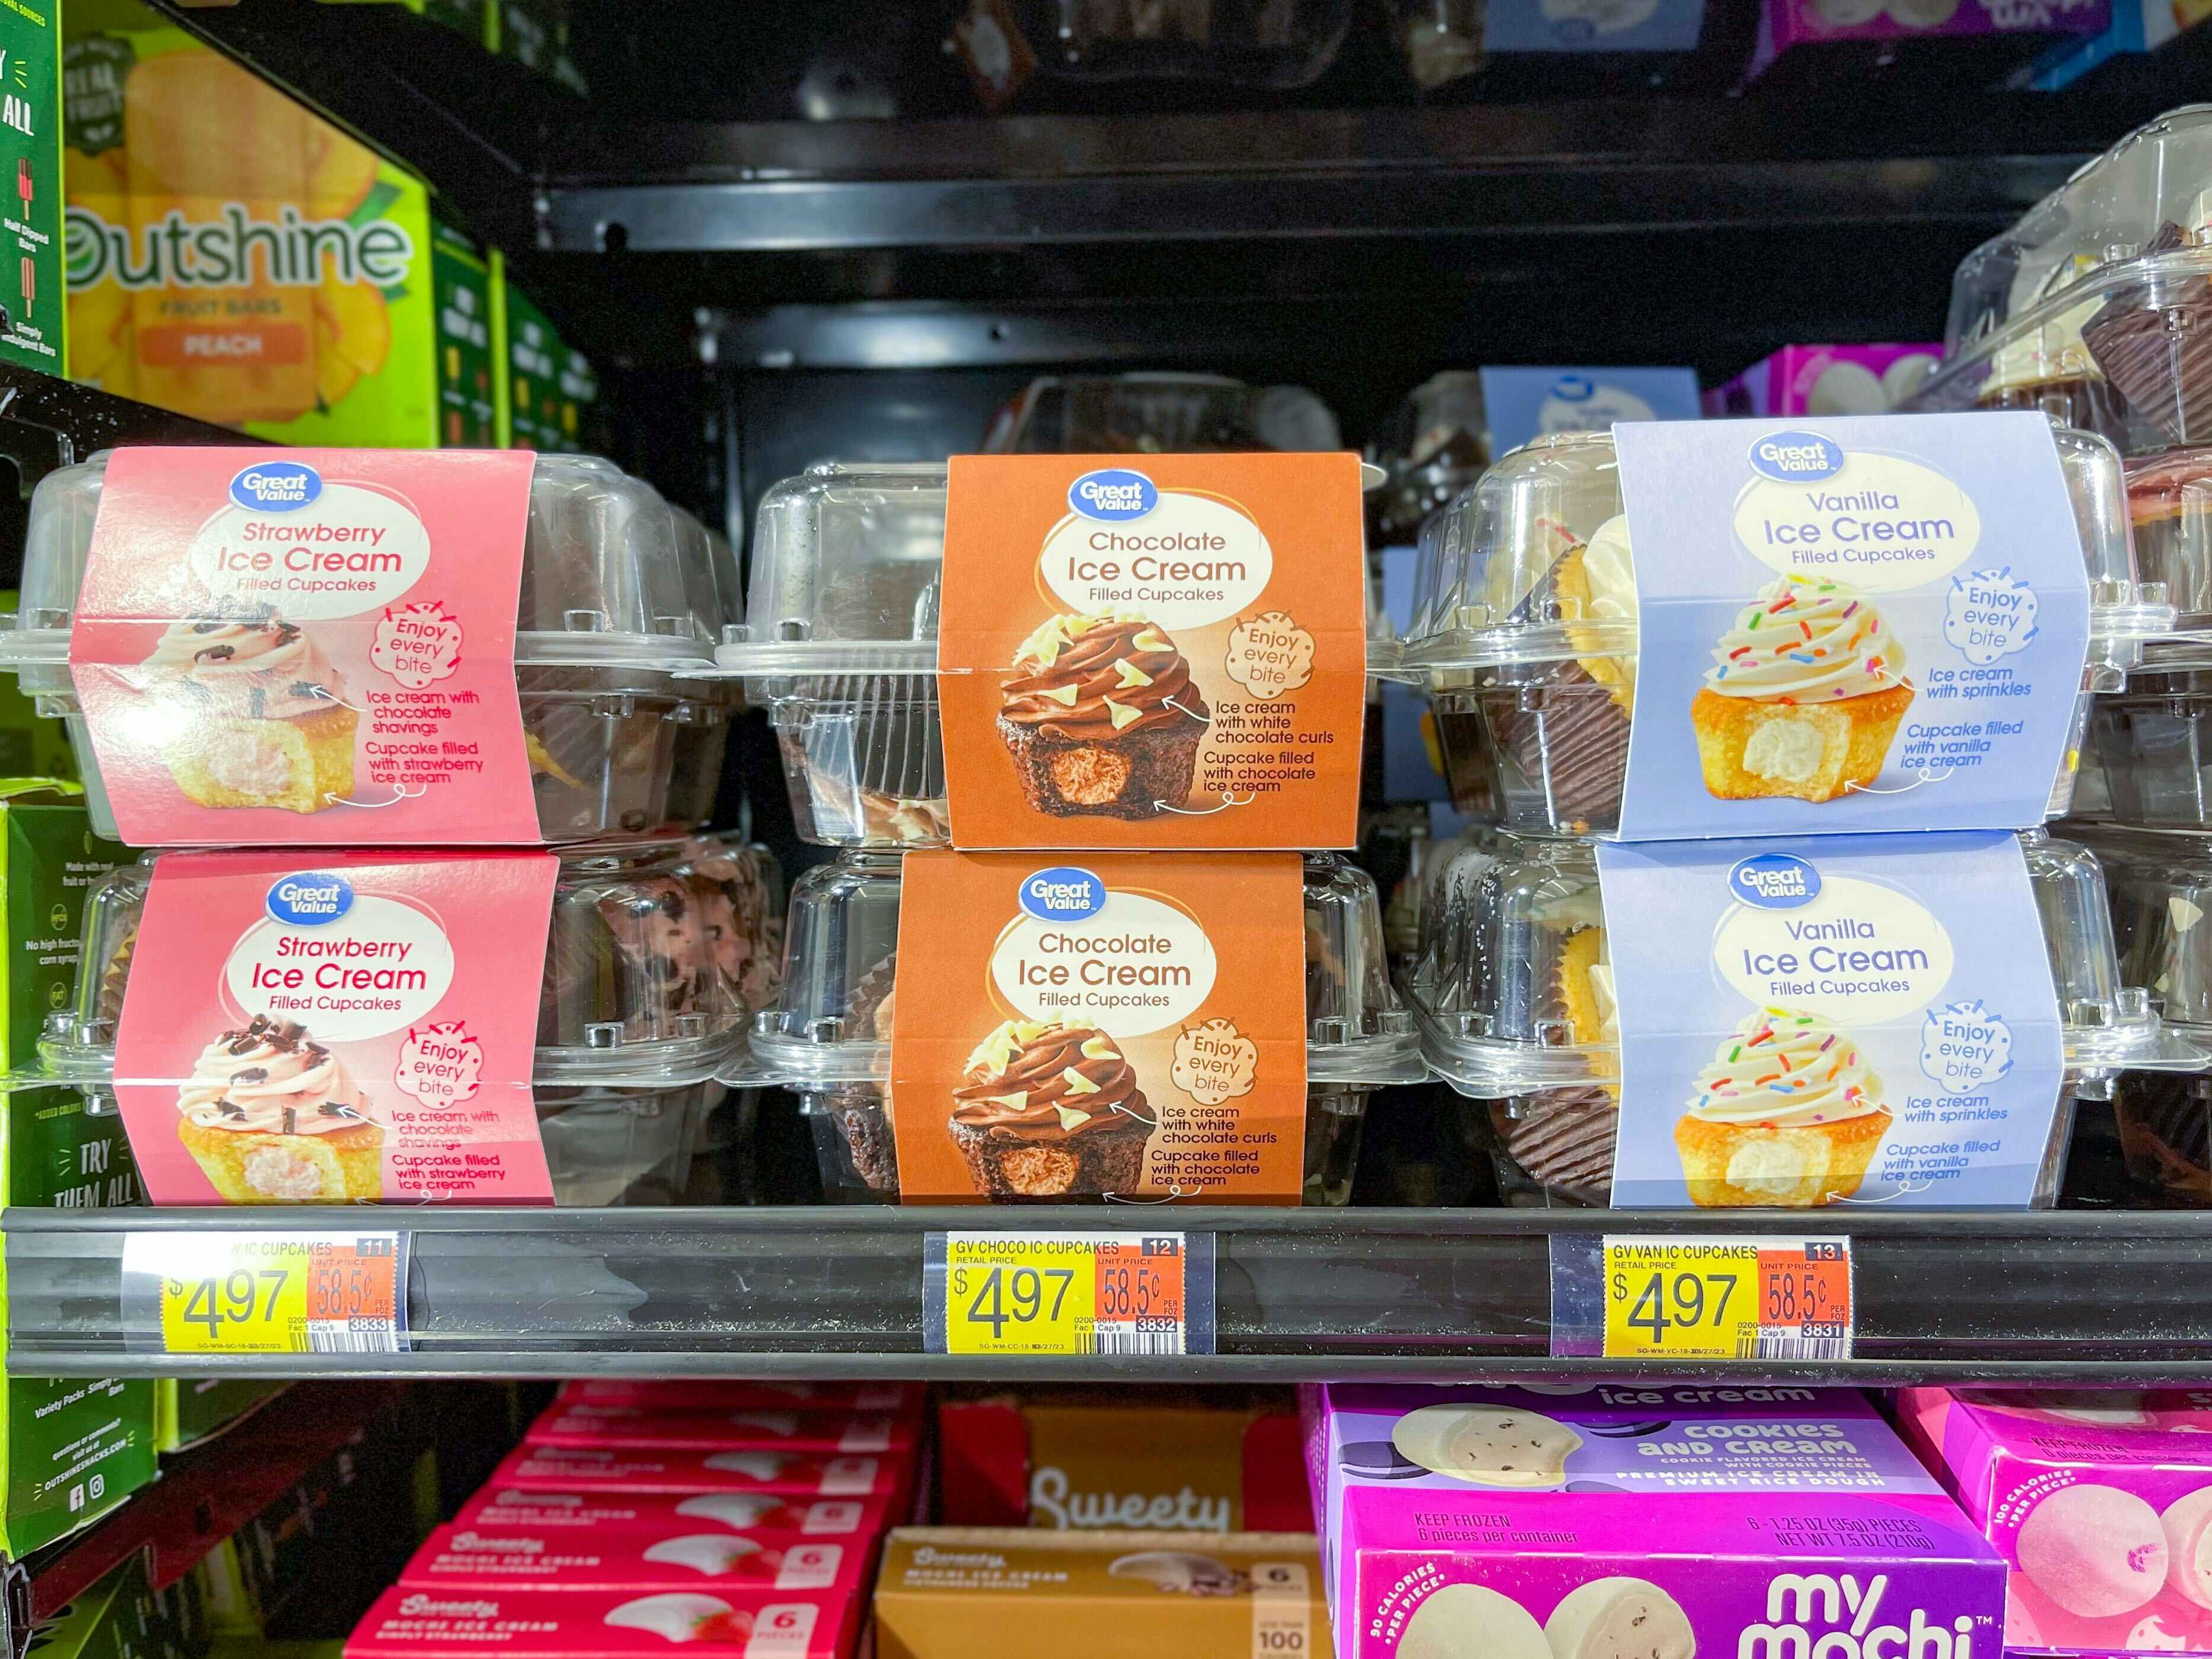 Packs of Great Value Vanilla, Chocolate, and Strawberry Ice Cream Filled Cupcakes in the freezer at Walmart